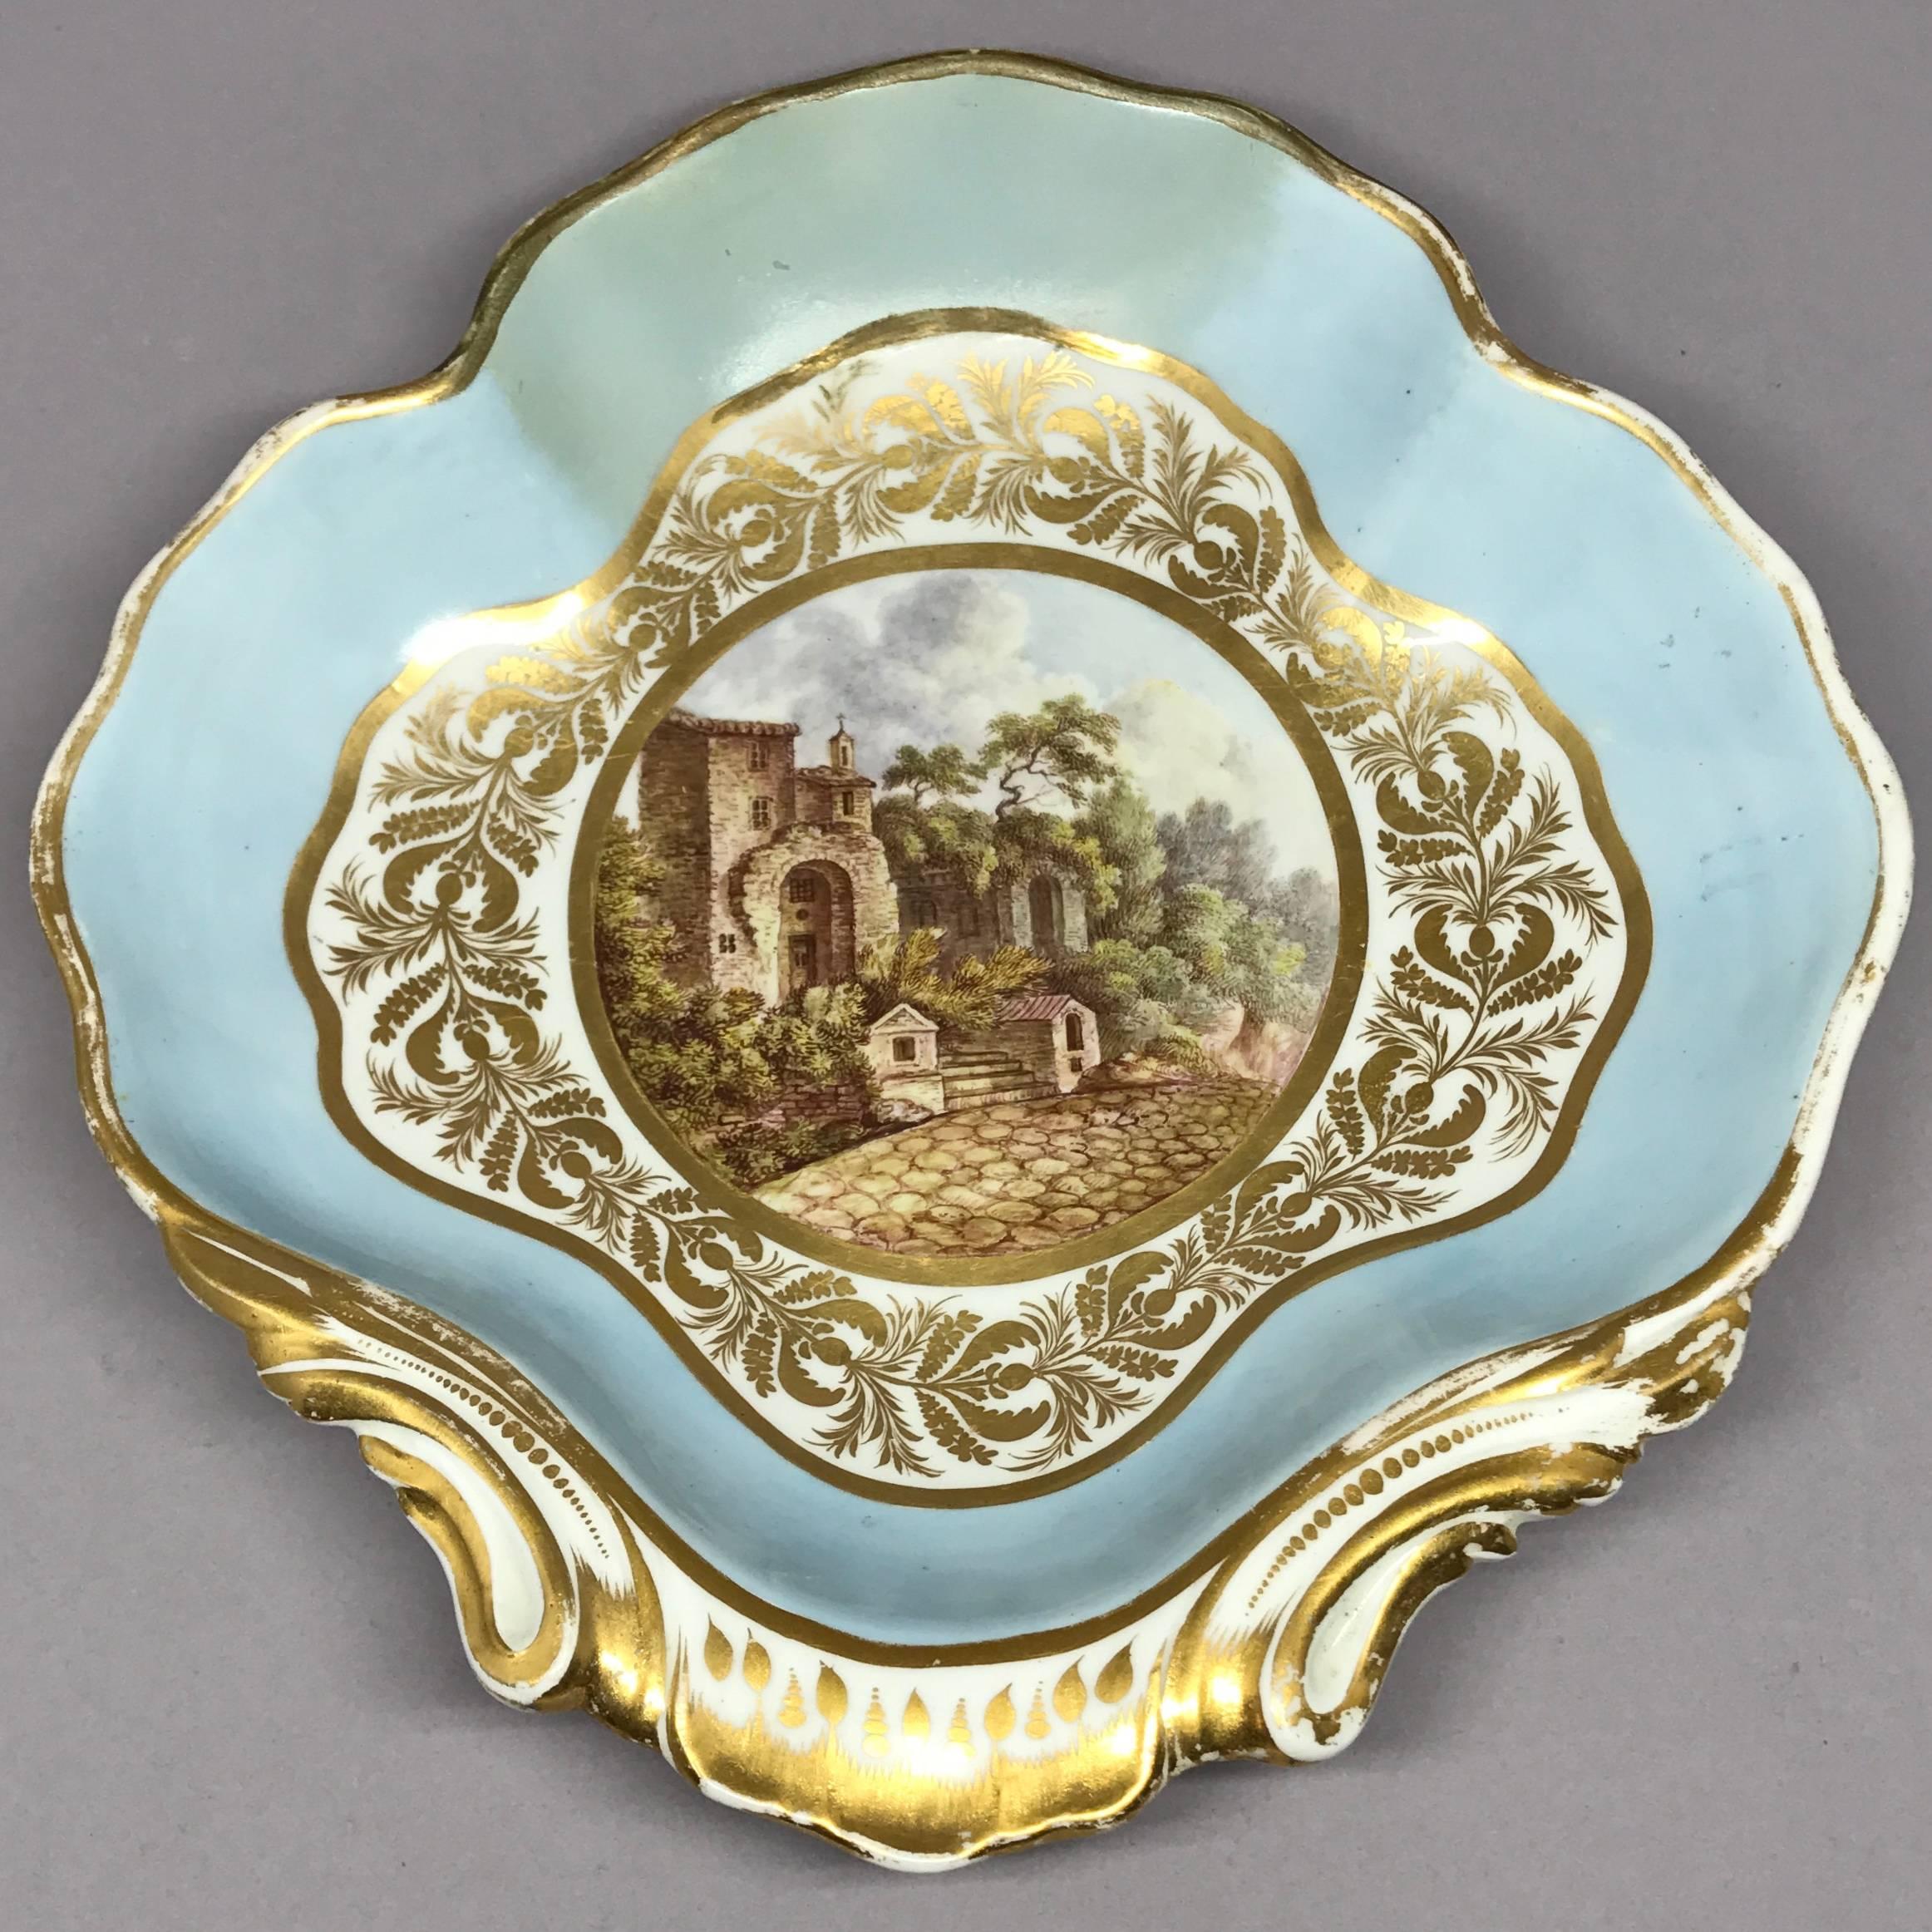 Derby gilt Italian scene shell form serving dish. Antique Derby sweetmeat plate with gorgeous gilt floral banding inside pale blue gilt border centering on painted view of the 